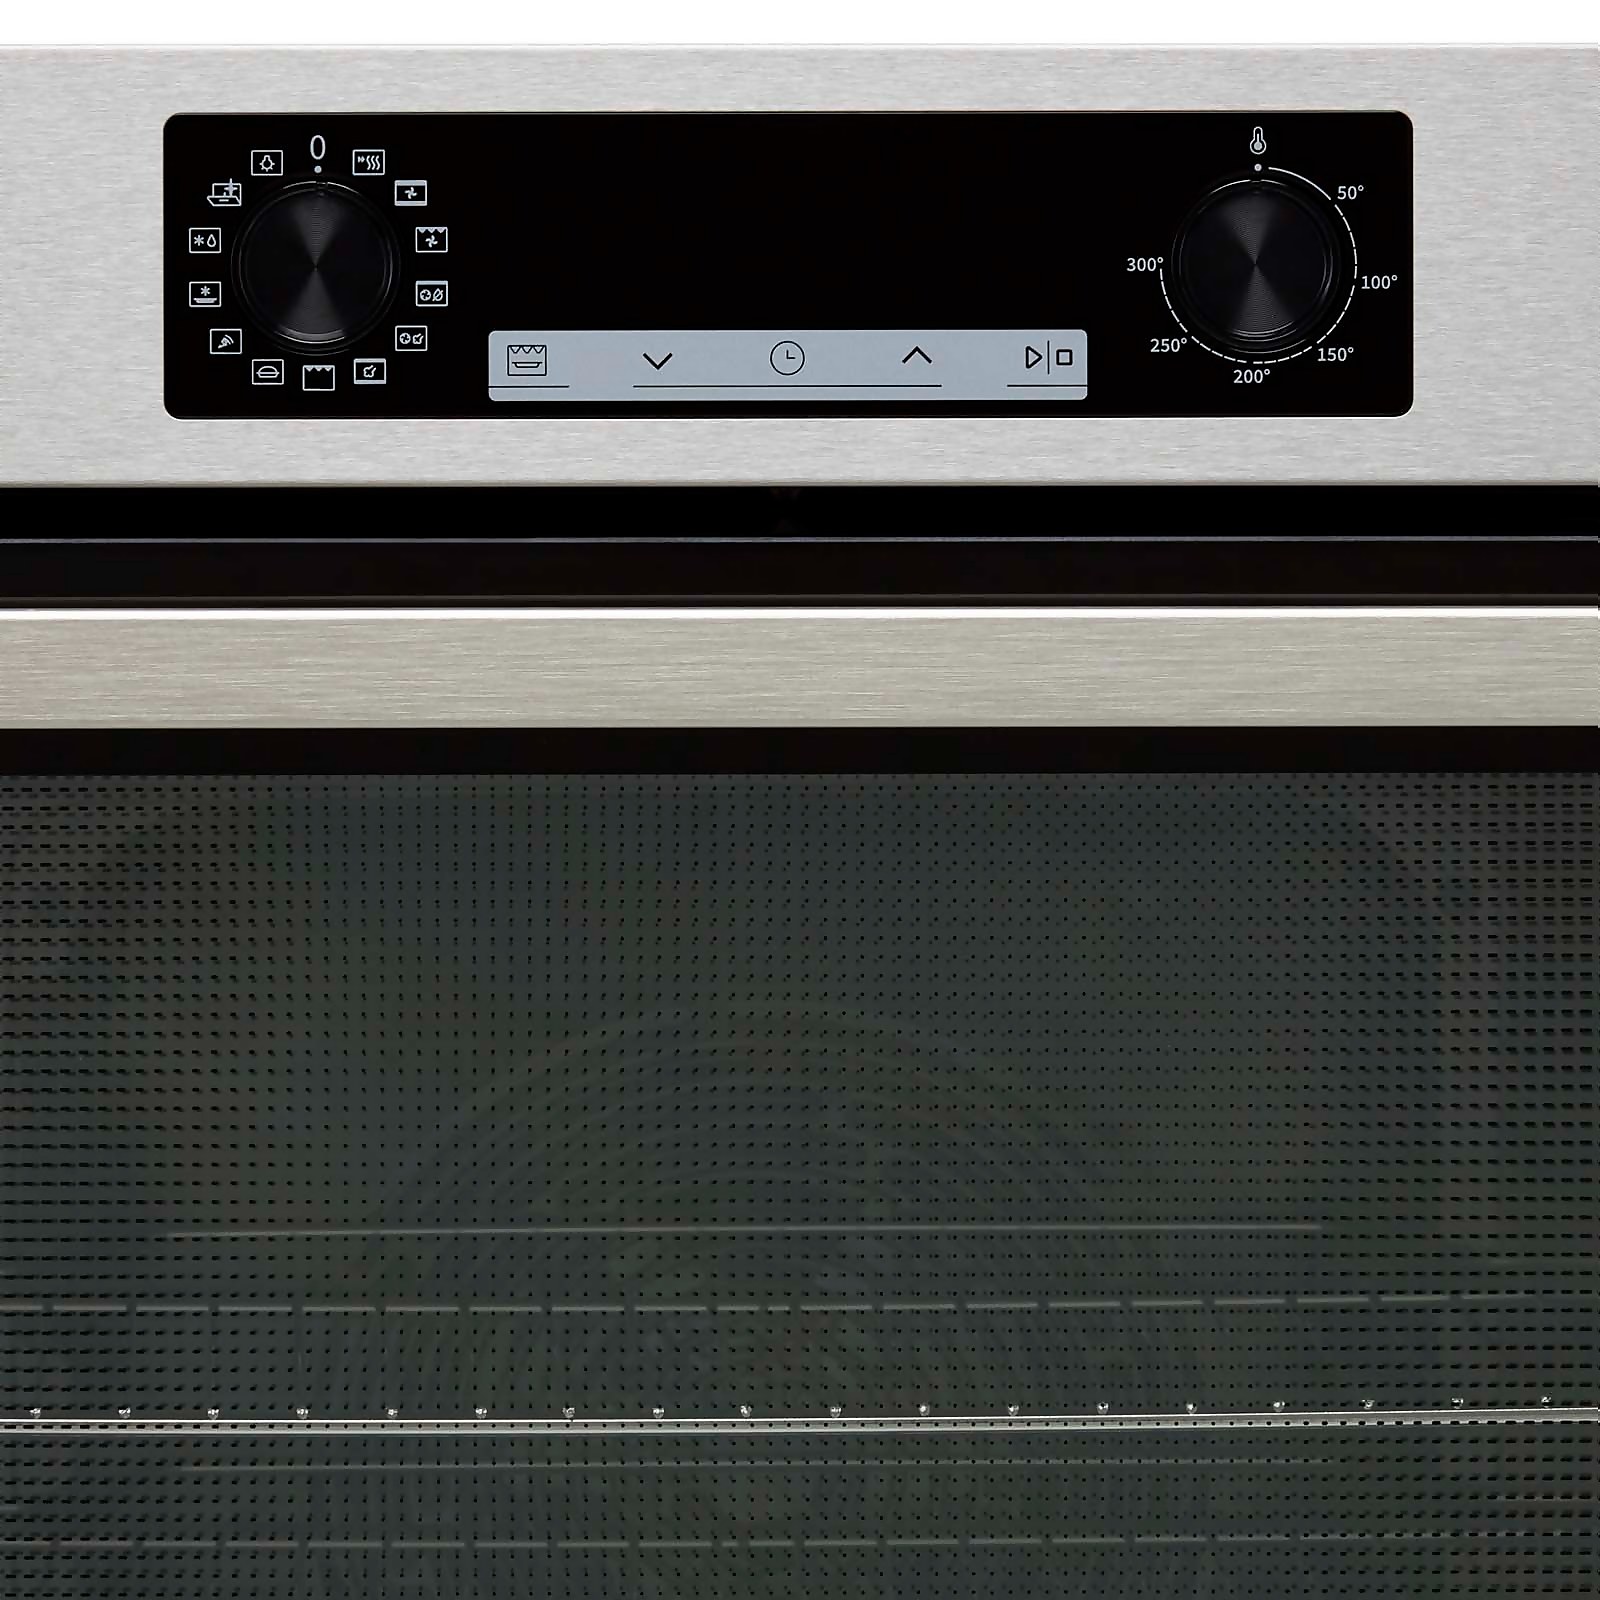 Photo of Hisense Bsa65222axuk Built In Electric Single Oven With Added Steam Function - Stainless Steel